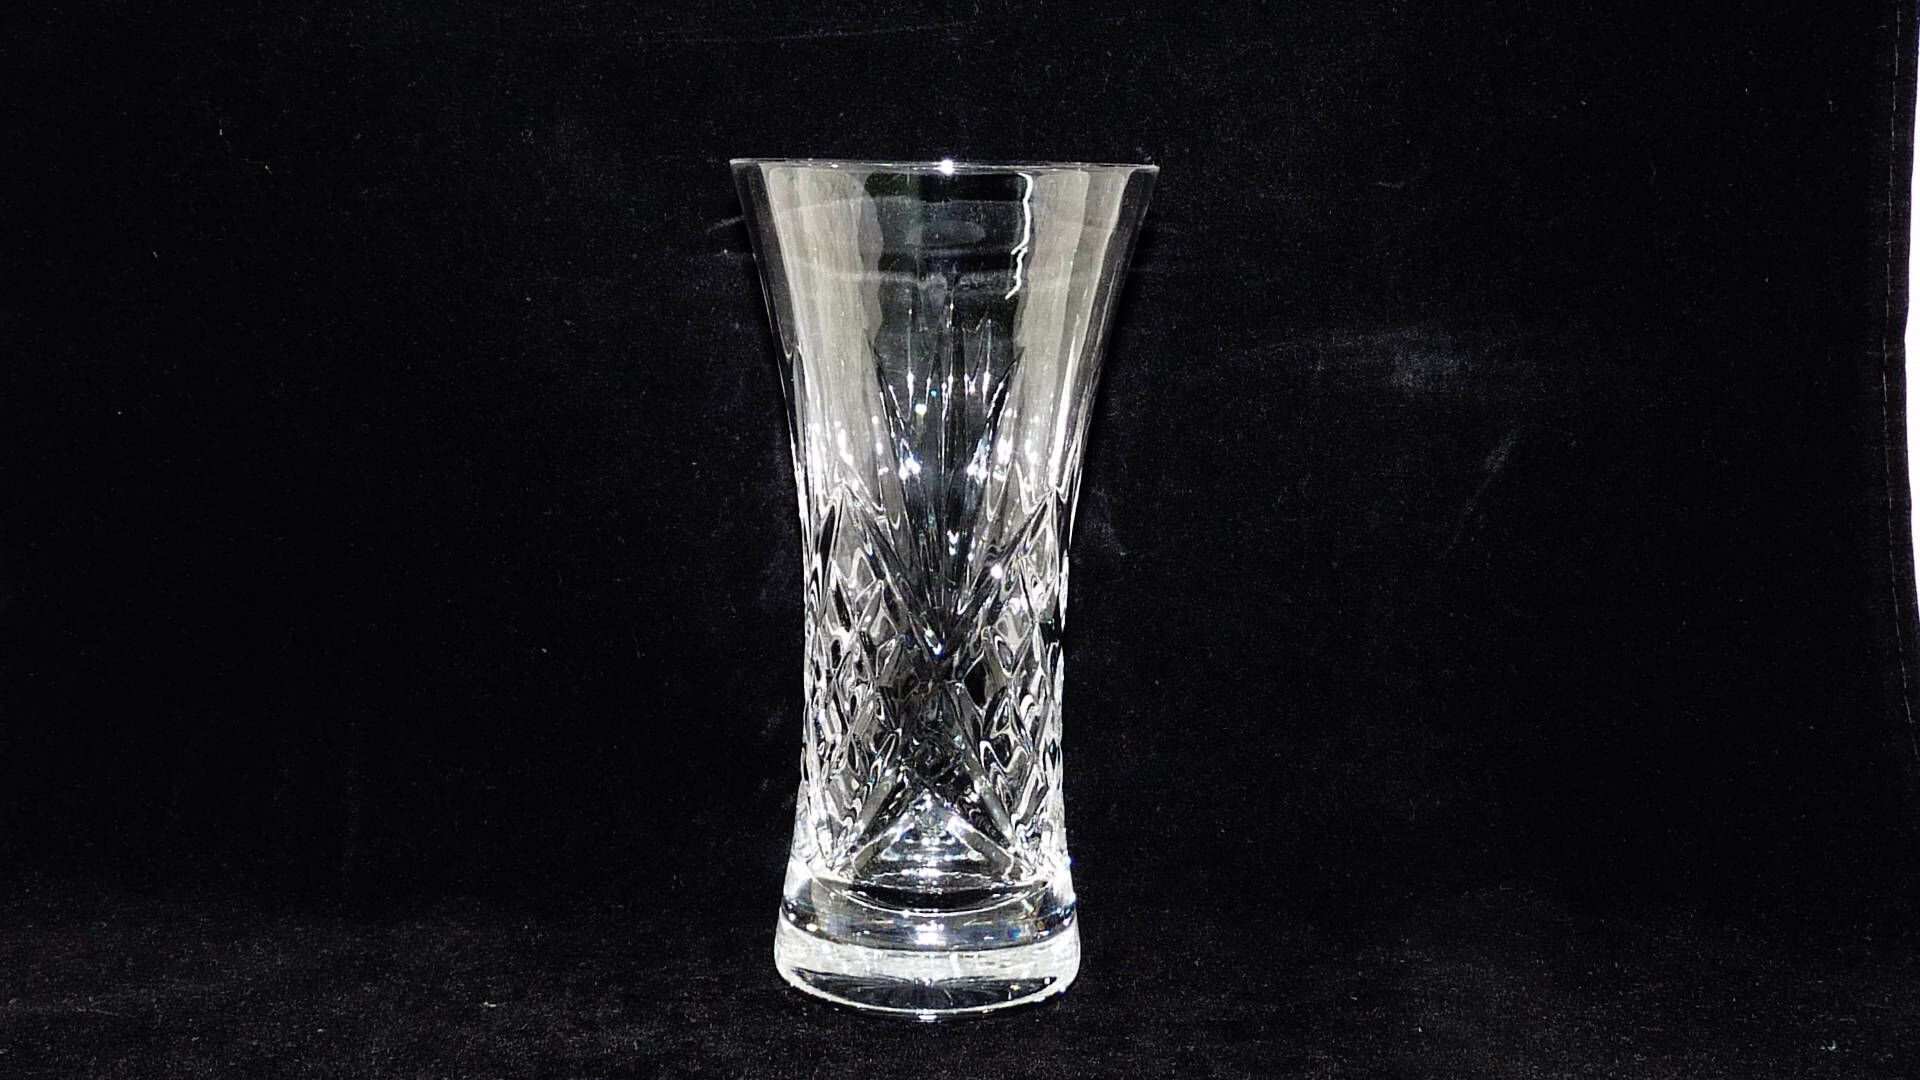 17 Stylish Small Glass Bud Vases wholesale 2024 free download small glass bud vases wholesale of vintage flower vase best of excited to share the latest addition to with vintage flower vase best of excited to share the latest addition to my etsy shop s